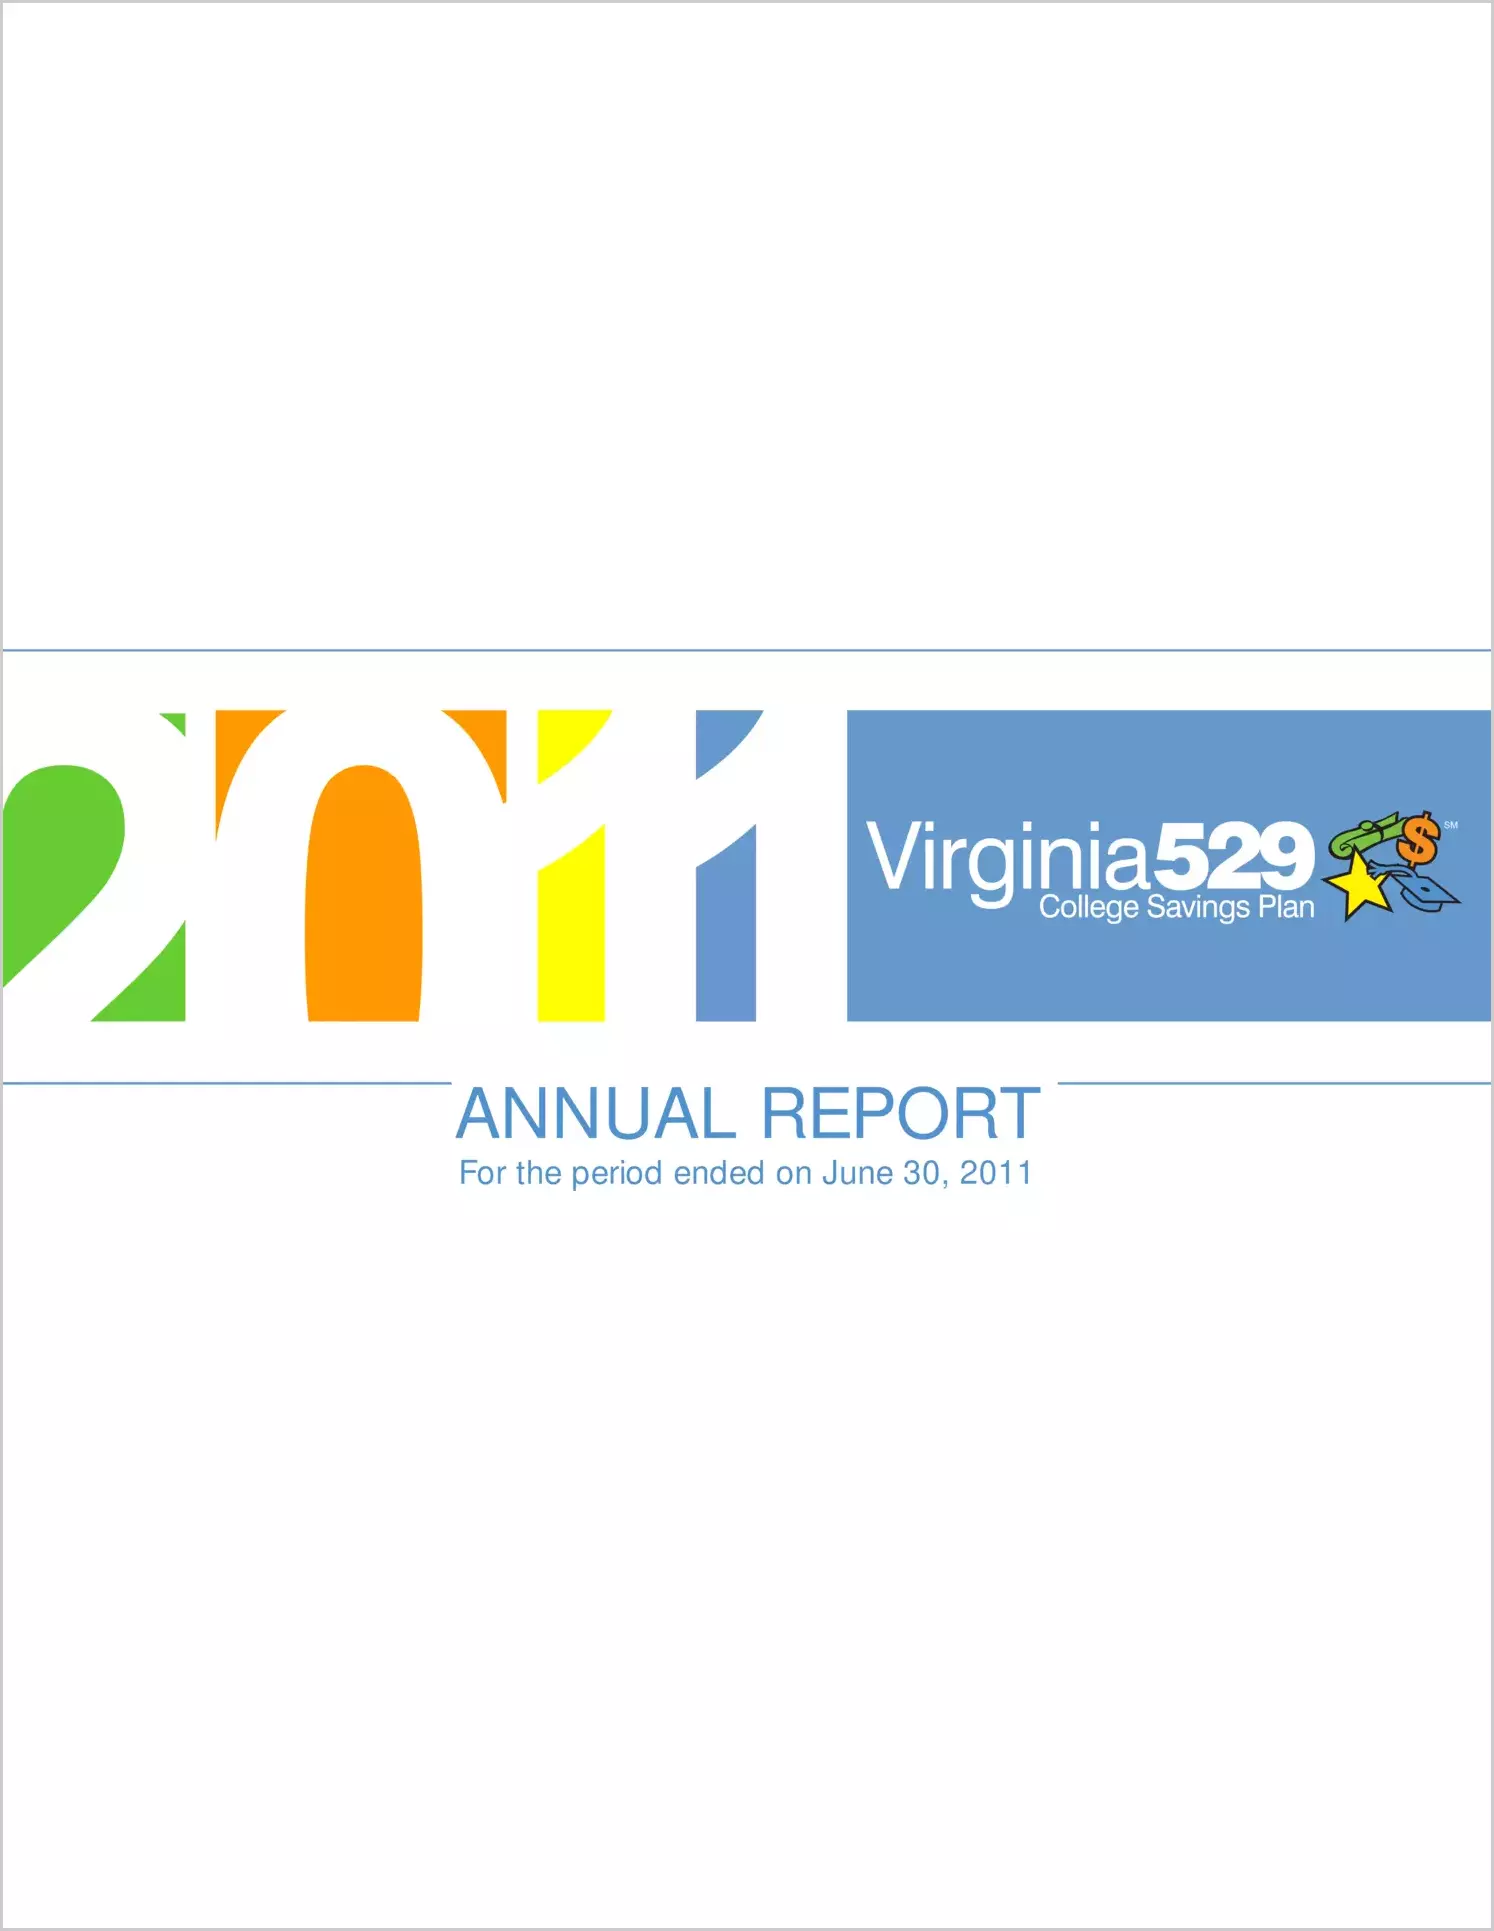 Virginia College Savings Plan Annual Report for the year ended June 30, 2011